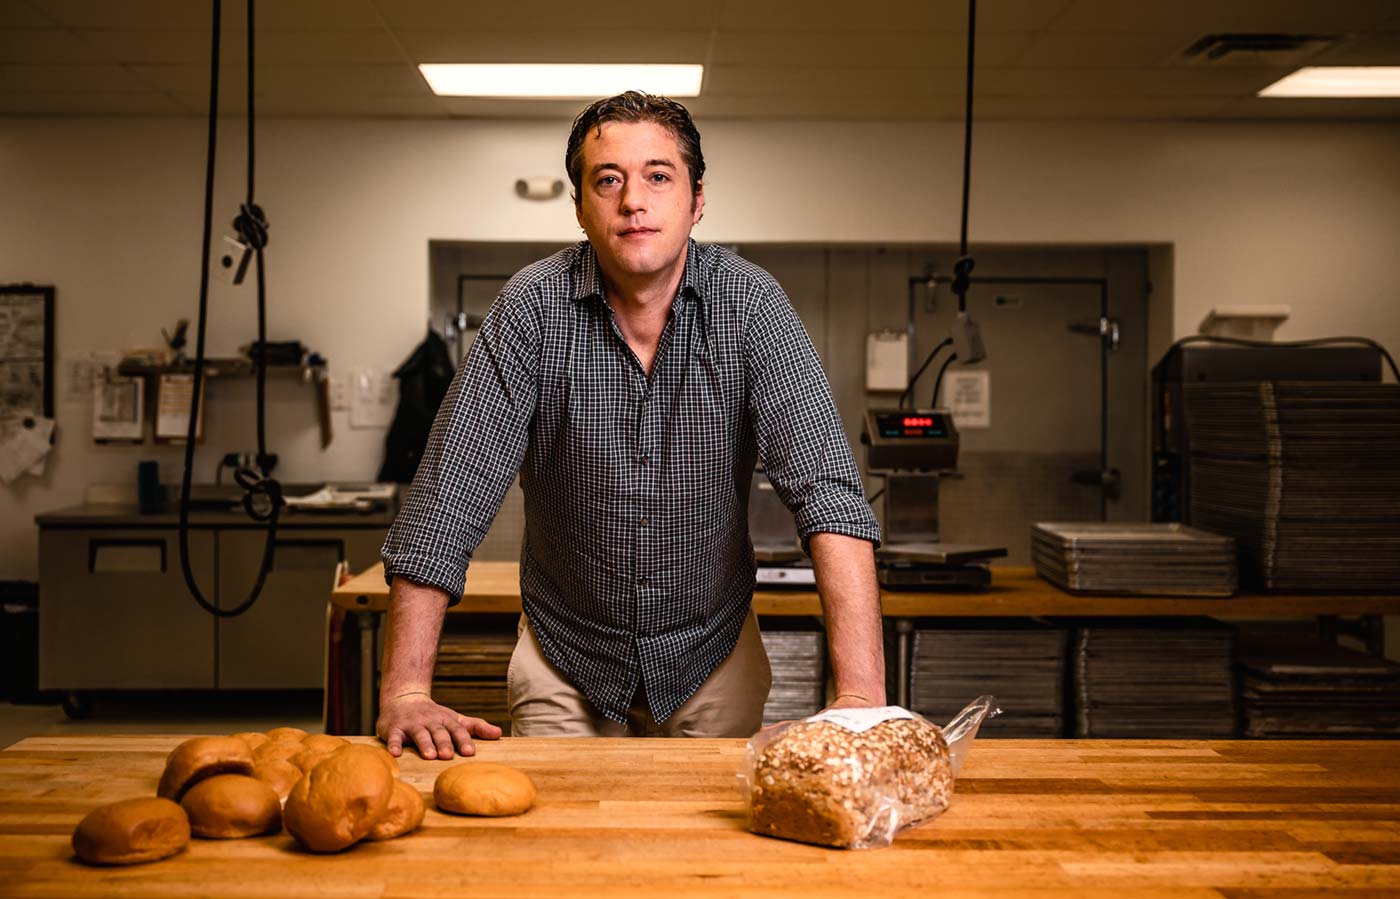 Andrew Semler built Lucky Cat from a farmers market table to the current Granville production bakery that opened in 2009.